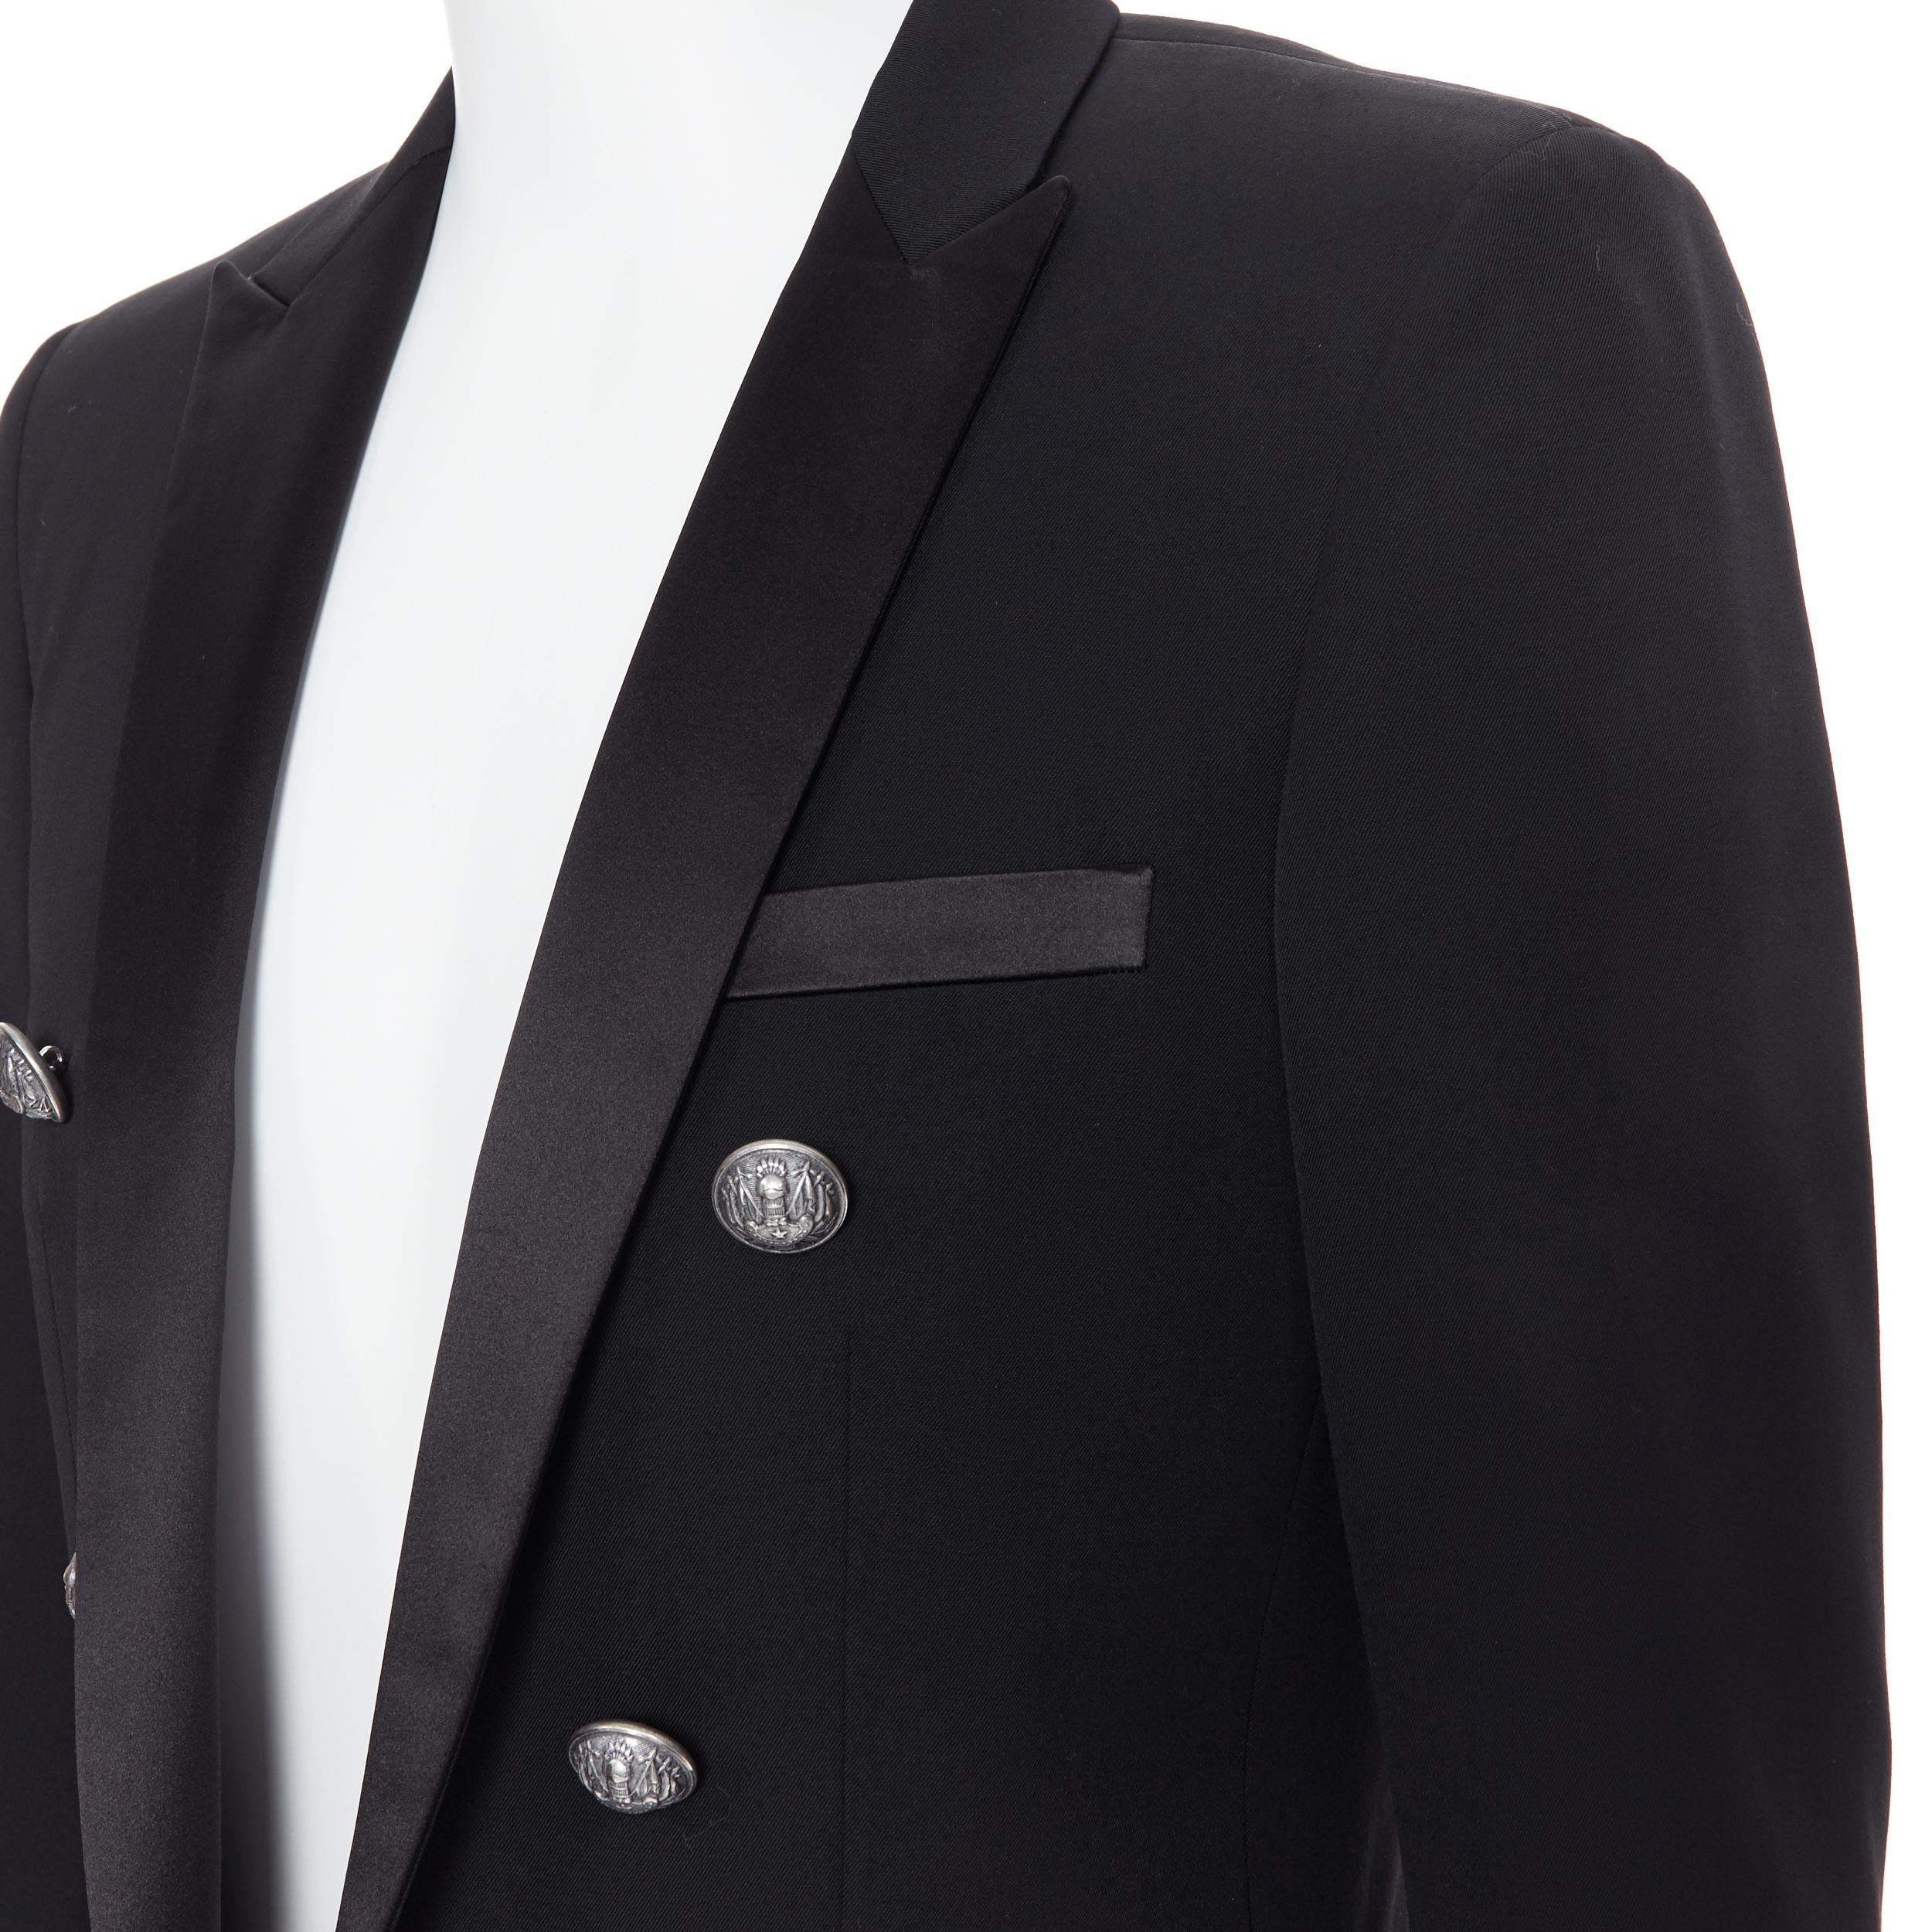 new BALMAIN black wool satin peak label double breasted blazer jacket EU48 M
Brand: Balmain
Designer: Olivier Rousteing
Model Name / Style: Double breasted jacket
Material: Wool
Color: Black
Pattern: Solid
Closure: Button
Extra Detail: BALMAIN style